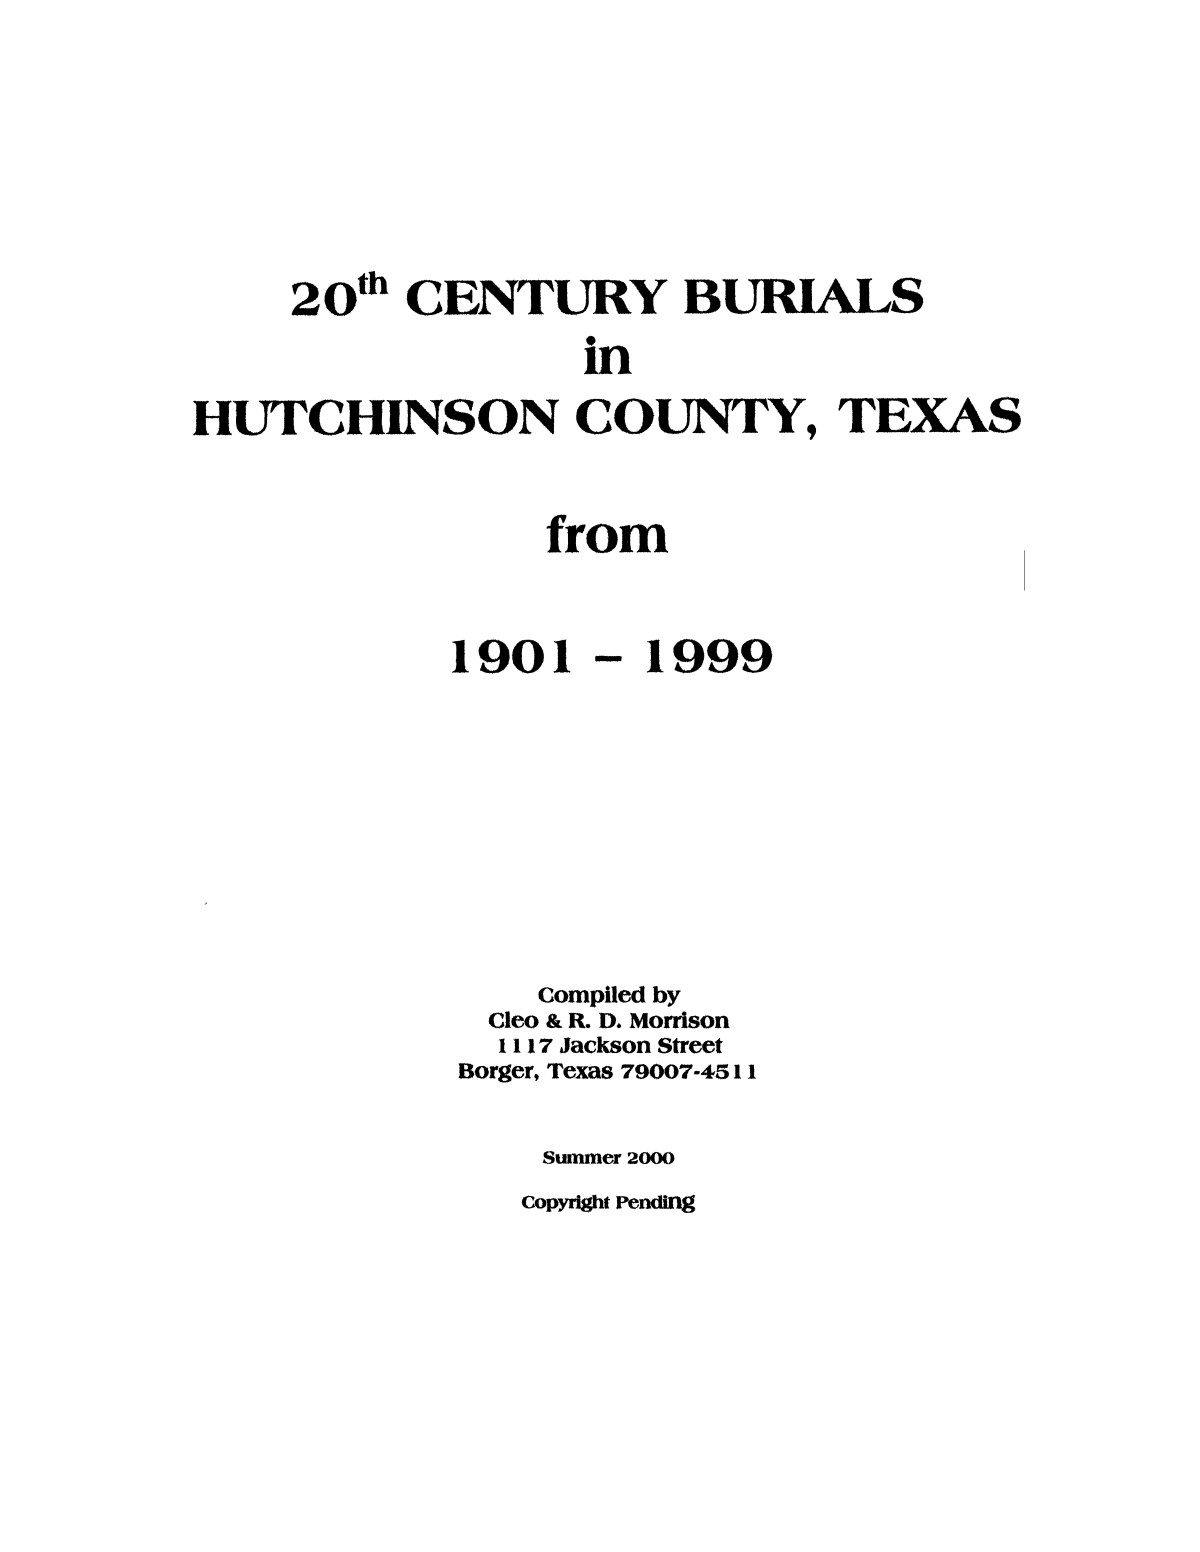 20th Century Burials in Hutchinson County, Texas from 1901-1999
                                                
                                                    Front Cover
                                                